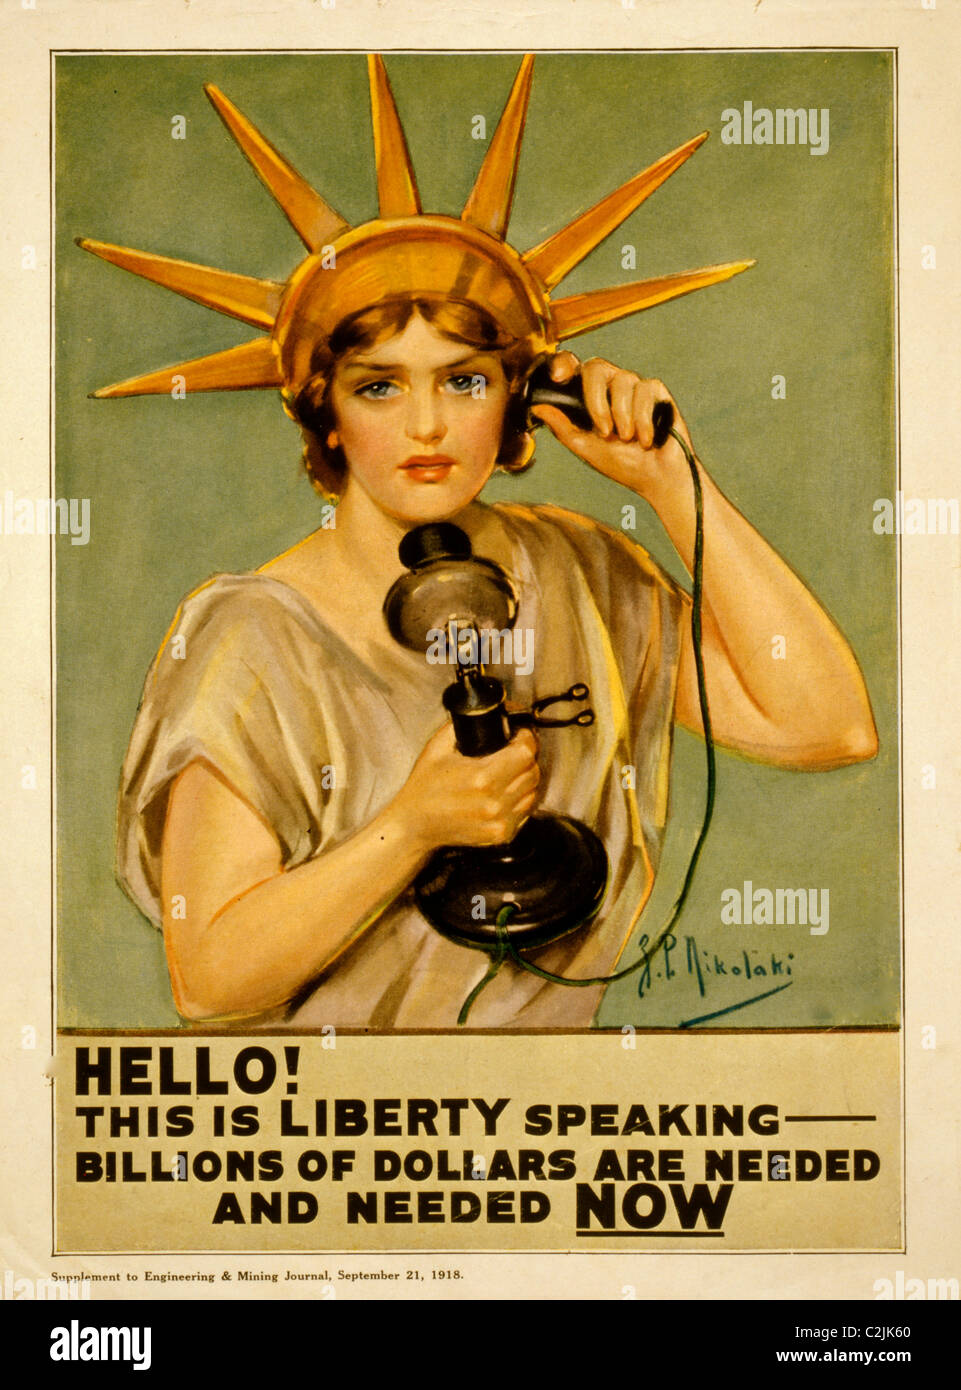 Hello! This is liberty speaking - billions of dollars are needed and needed now Stock Photo